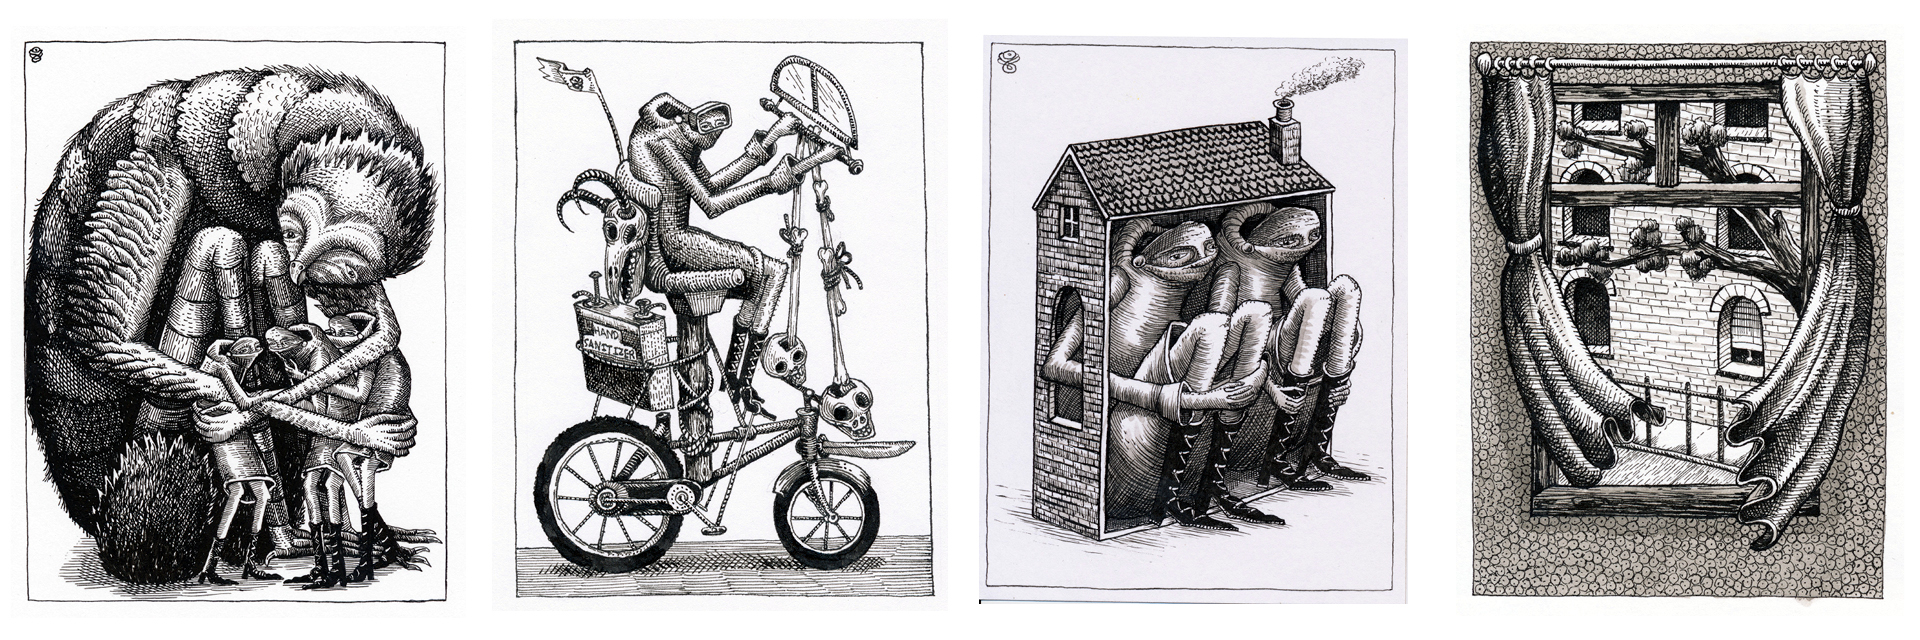 4 pen and ink drawings (left to right): a bird-like figure sitting down and hugging 3 human-like figures; a human-like figure riding a modified bicycle with a box which has "hand sanitiser" printed on it; two human-like figures sitting inside a house exterior; a interior wall, window and curtains overlooking a tree and garden. 